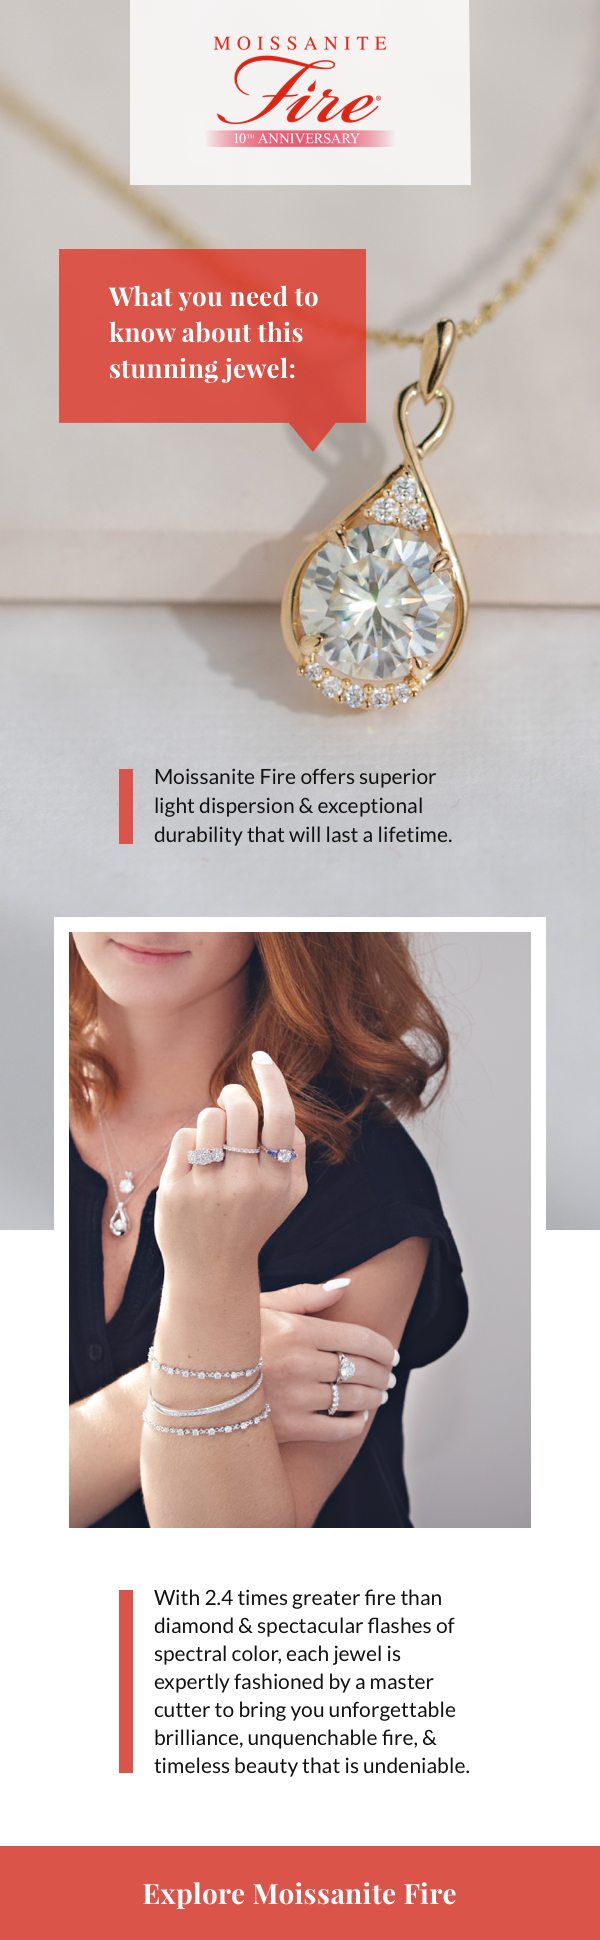 Explore the Moissanite Fire collection